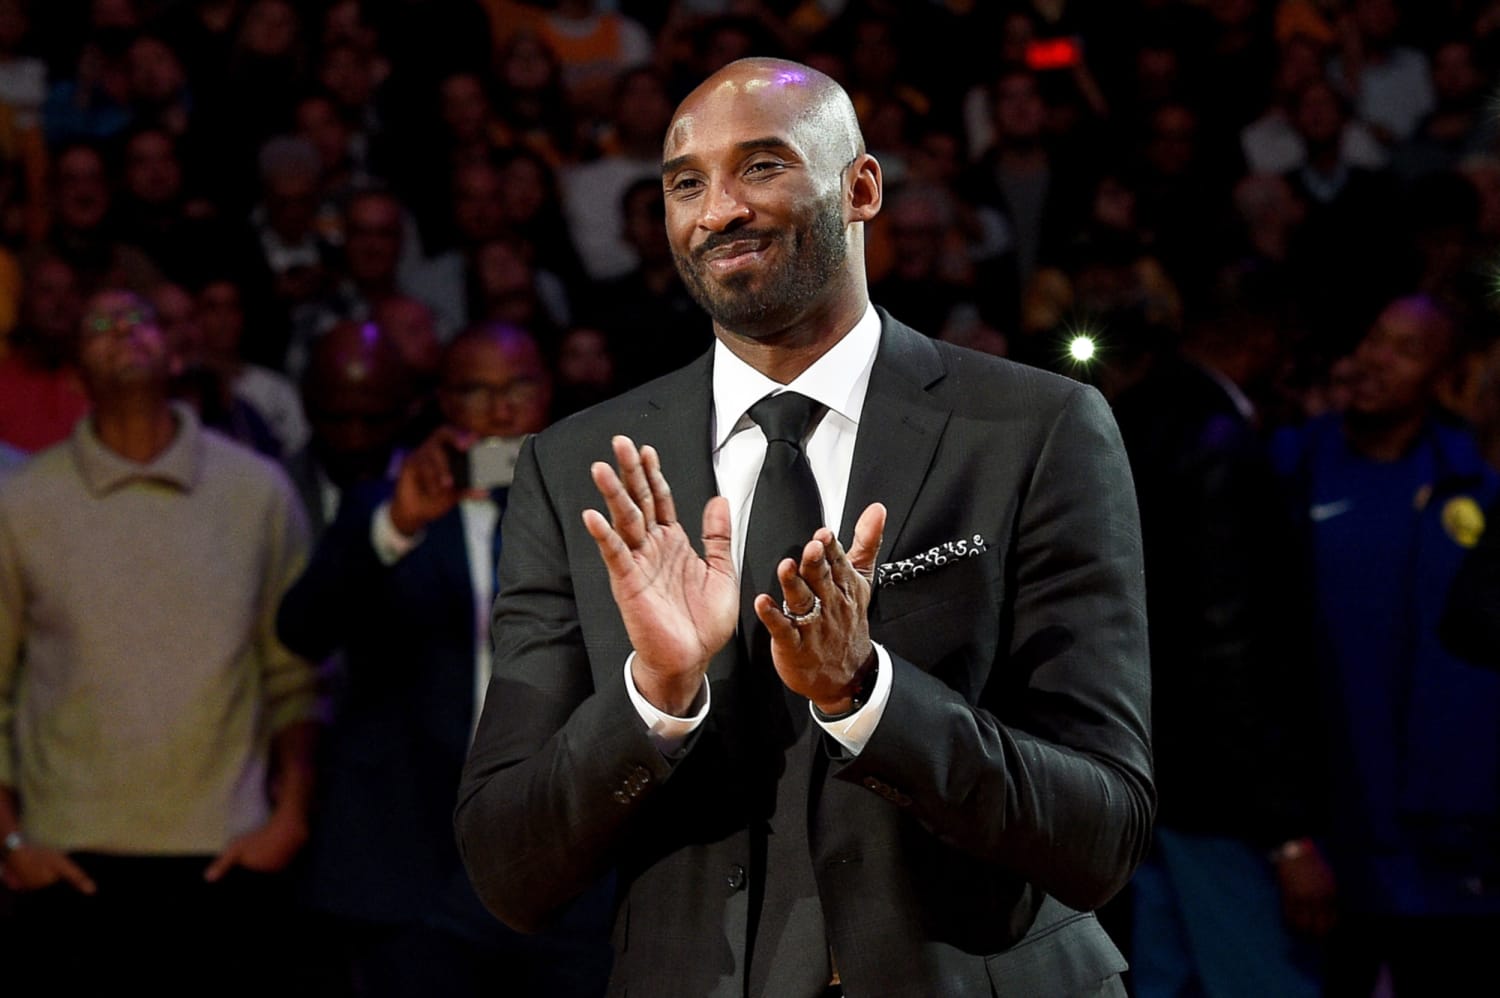 Los Angeles Lakers to unveil Kobe Bryant statue outside their arena on Feb.  8